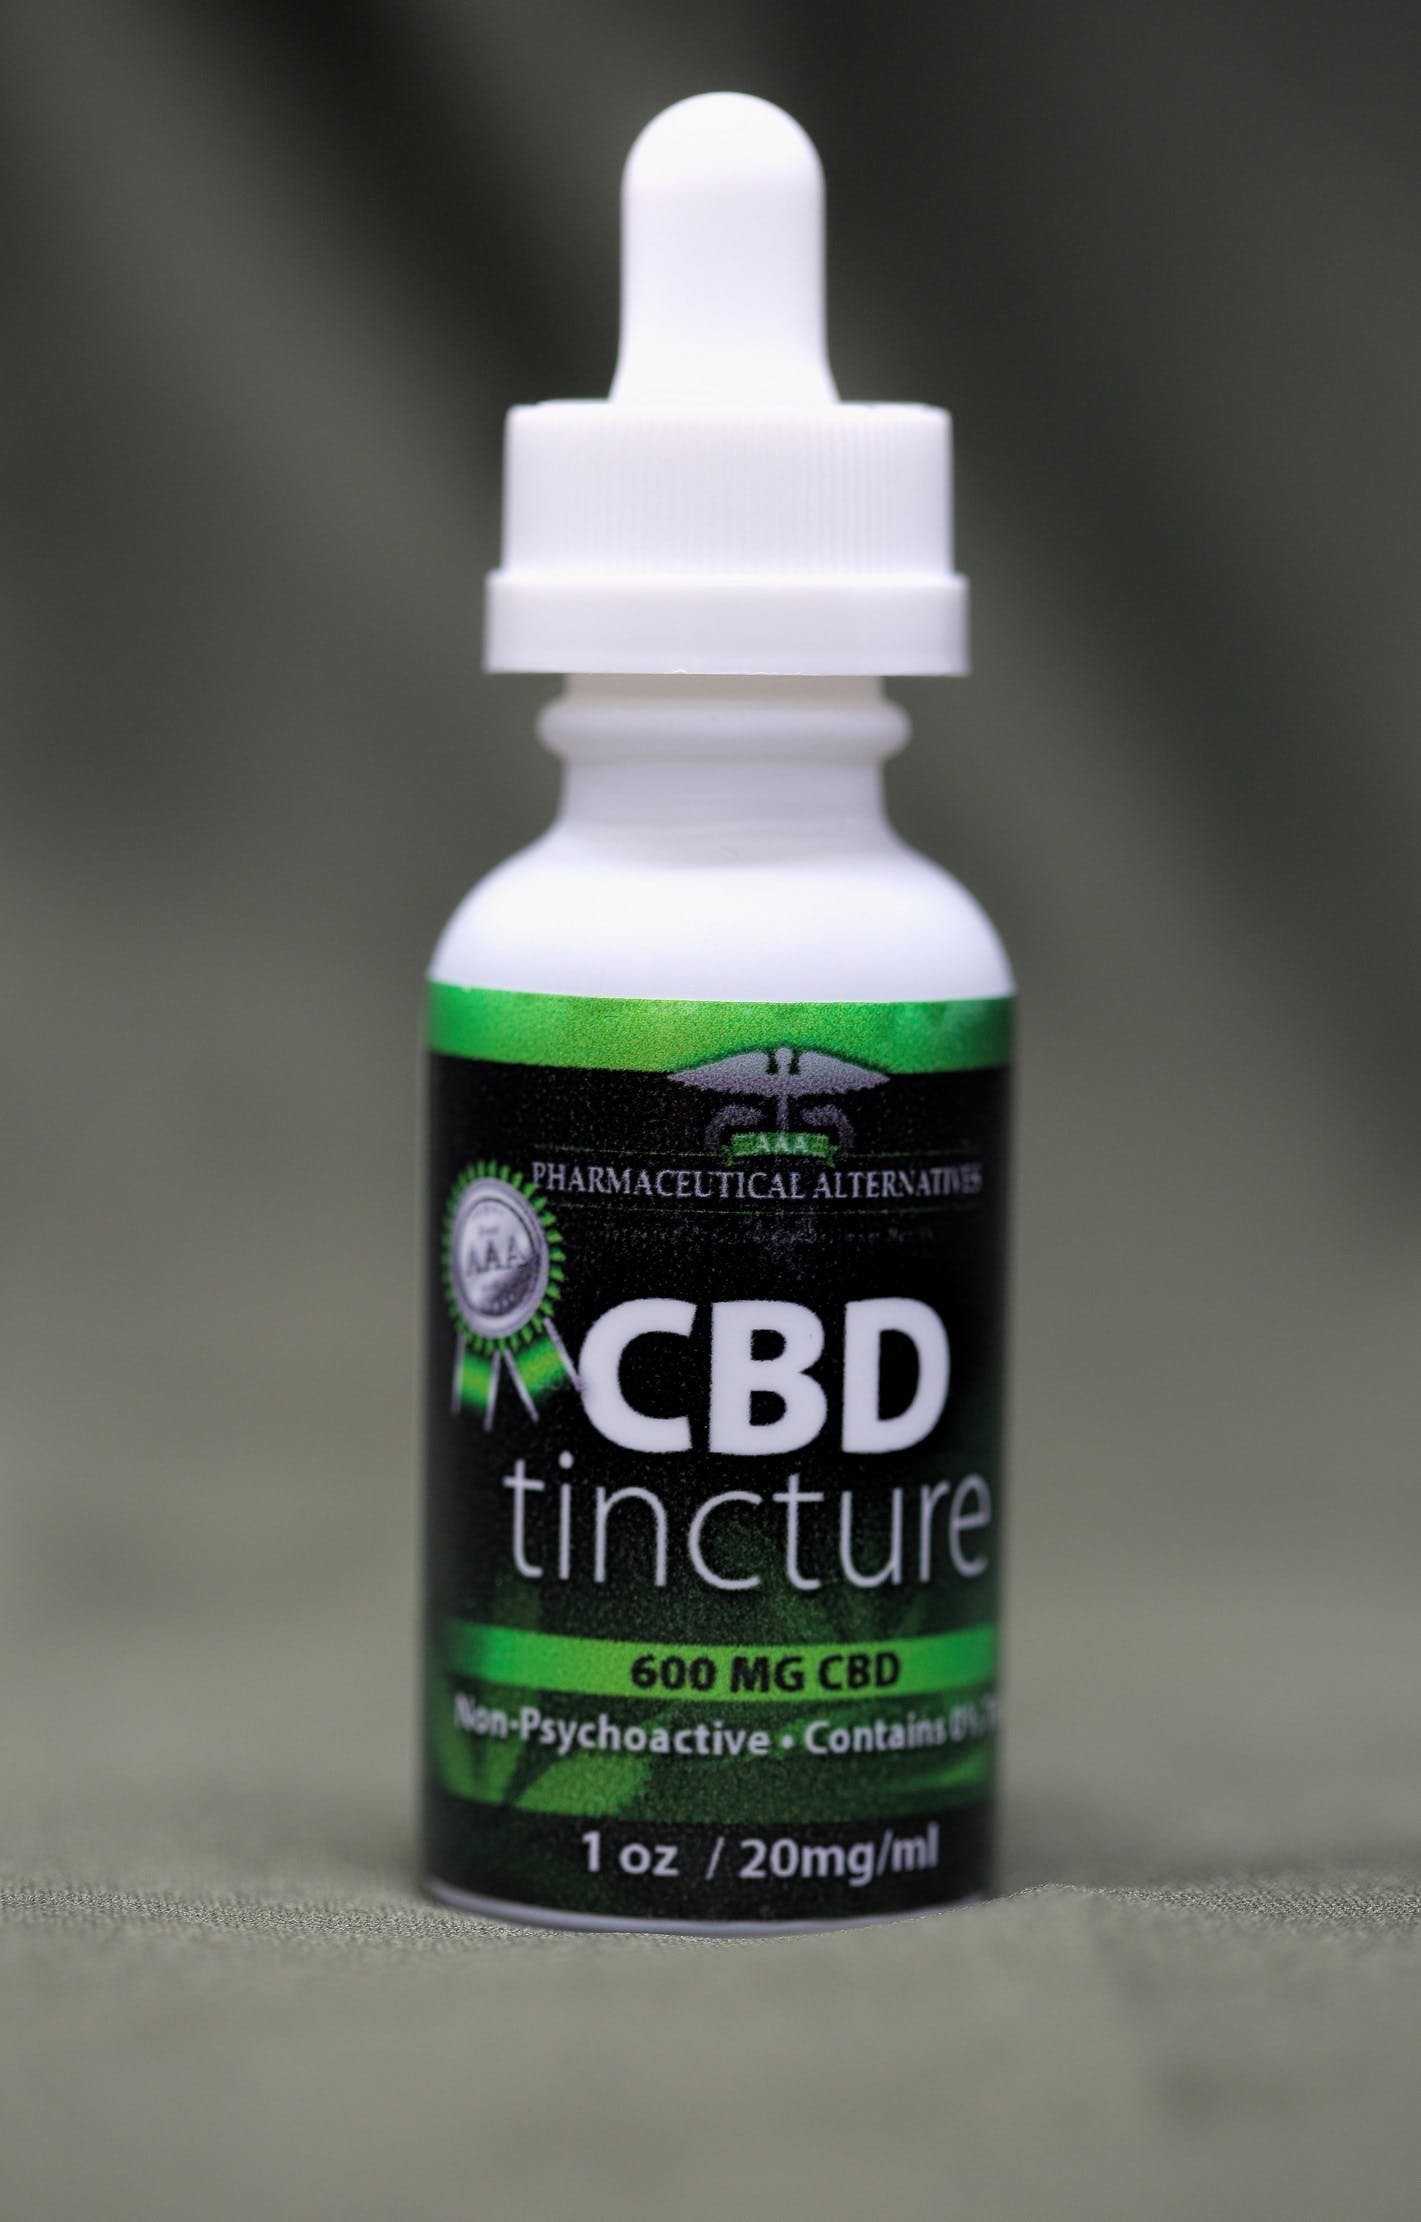 tincture-600-mg-cbd-tincture-with-isolate-1-oz-20-mgml